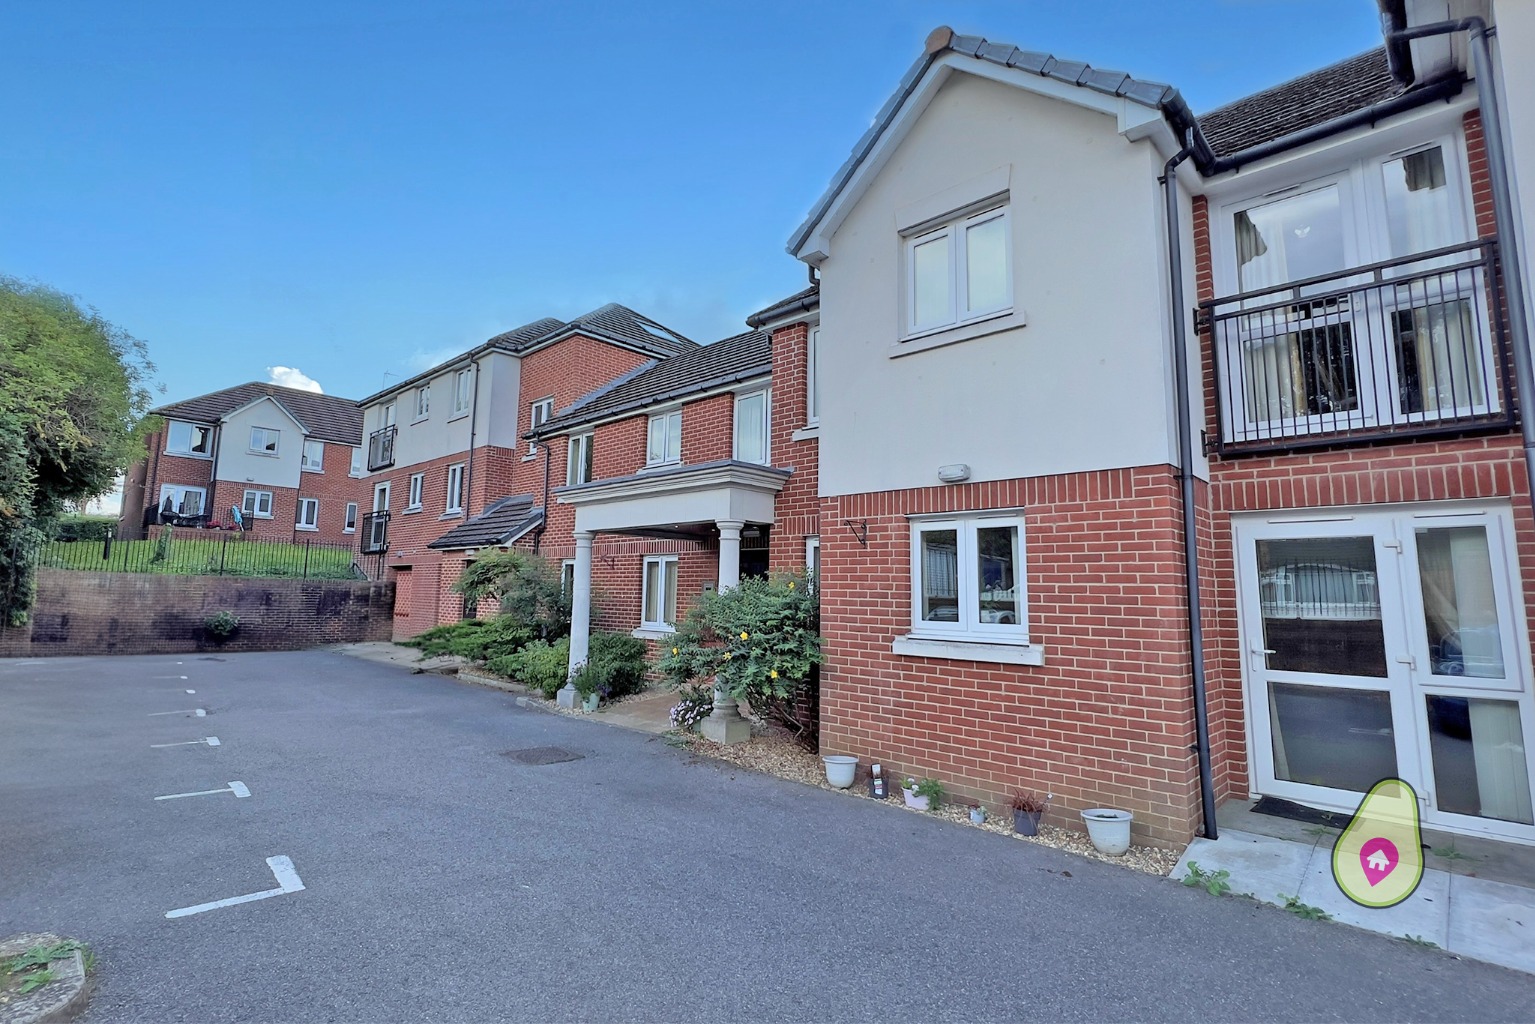 1 bed flat for sale in Chieveley Close, Reading - Property Image 1